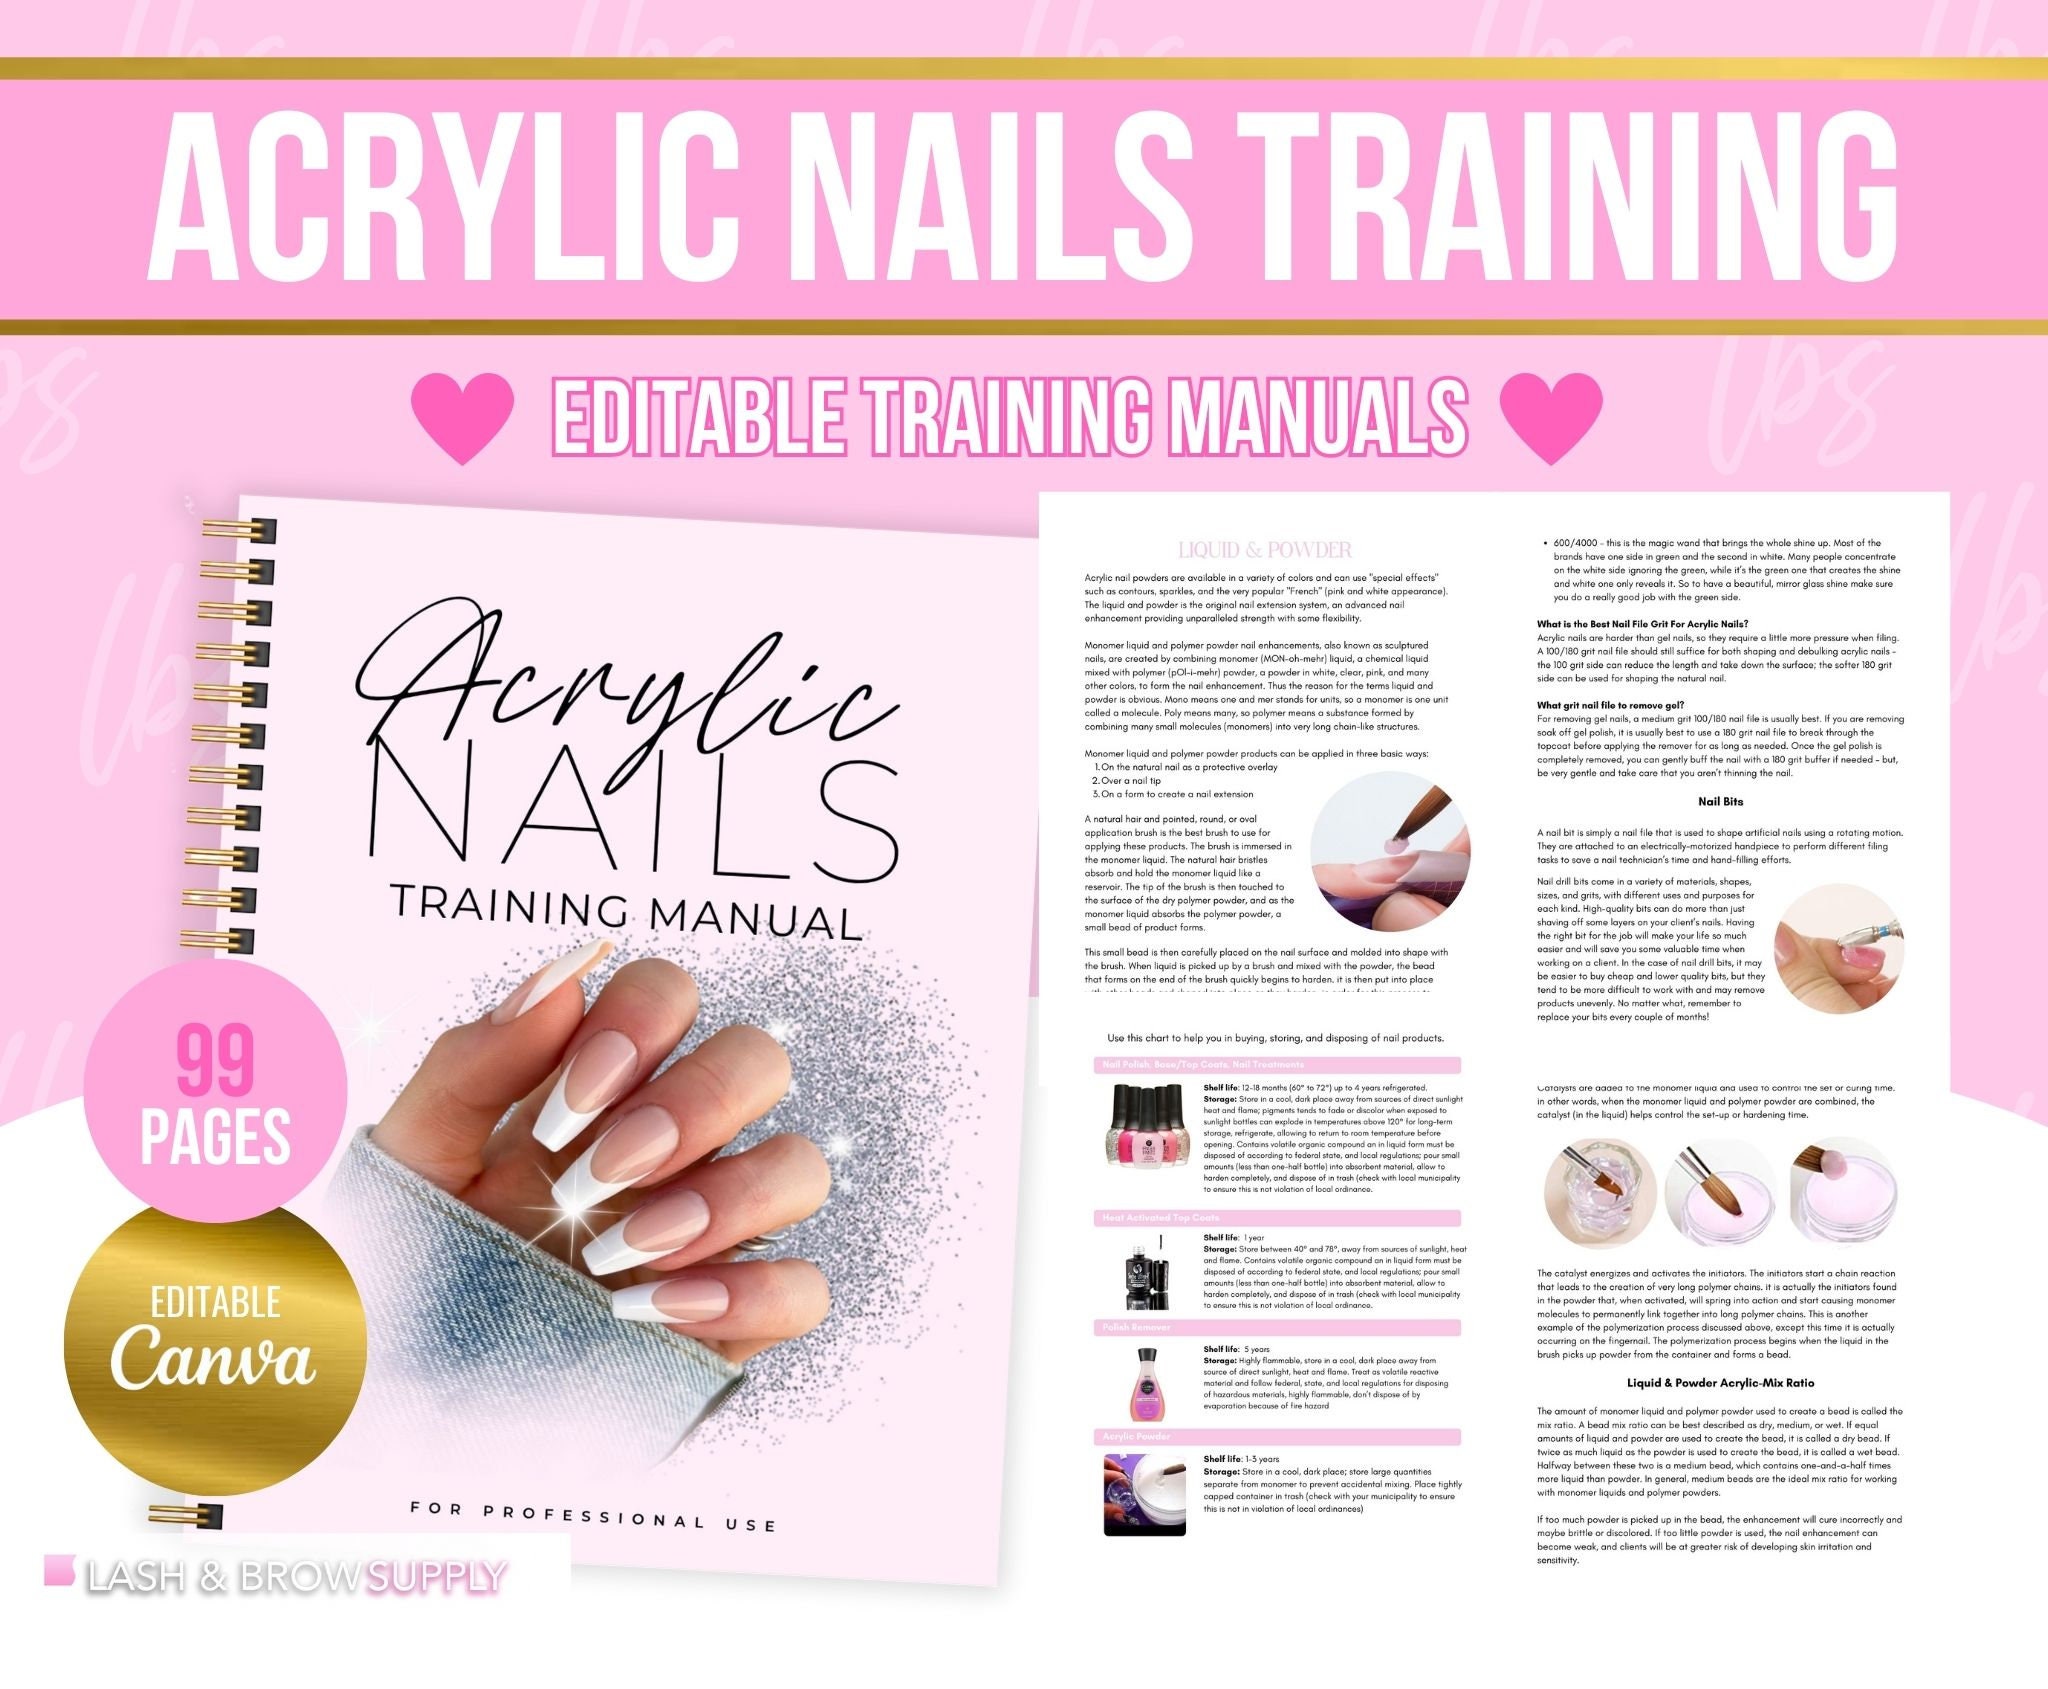 How To Do Acrylic Nails At Home Step By Step - A Beginner's Guide |  Acrylnagels, Nagels